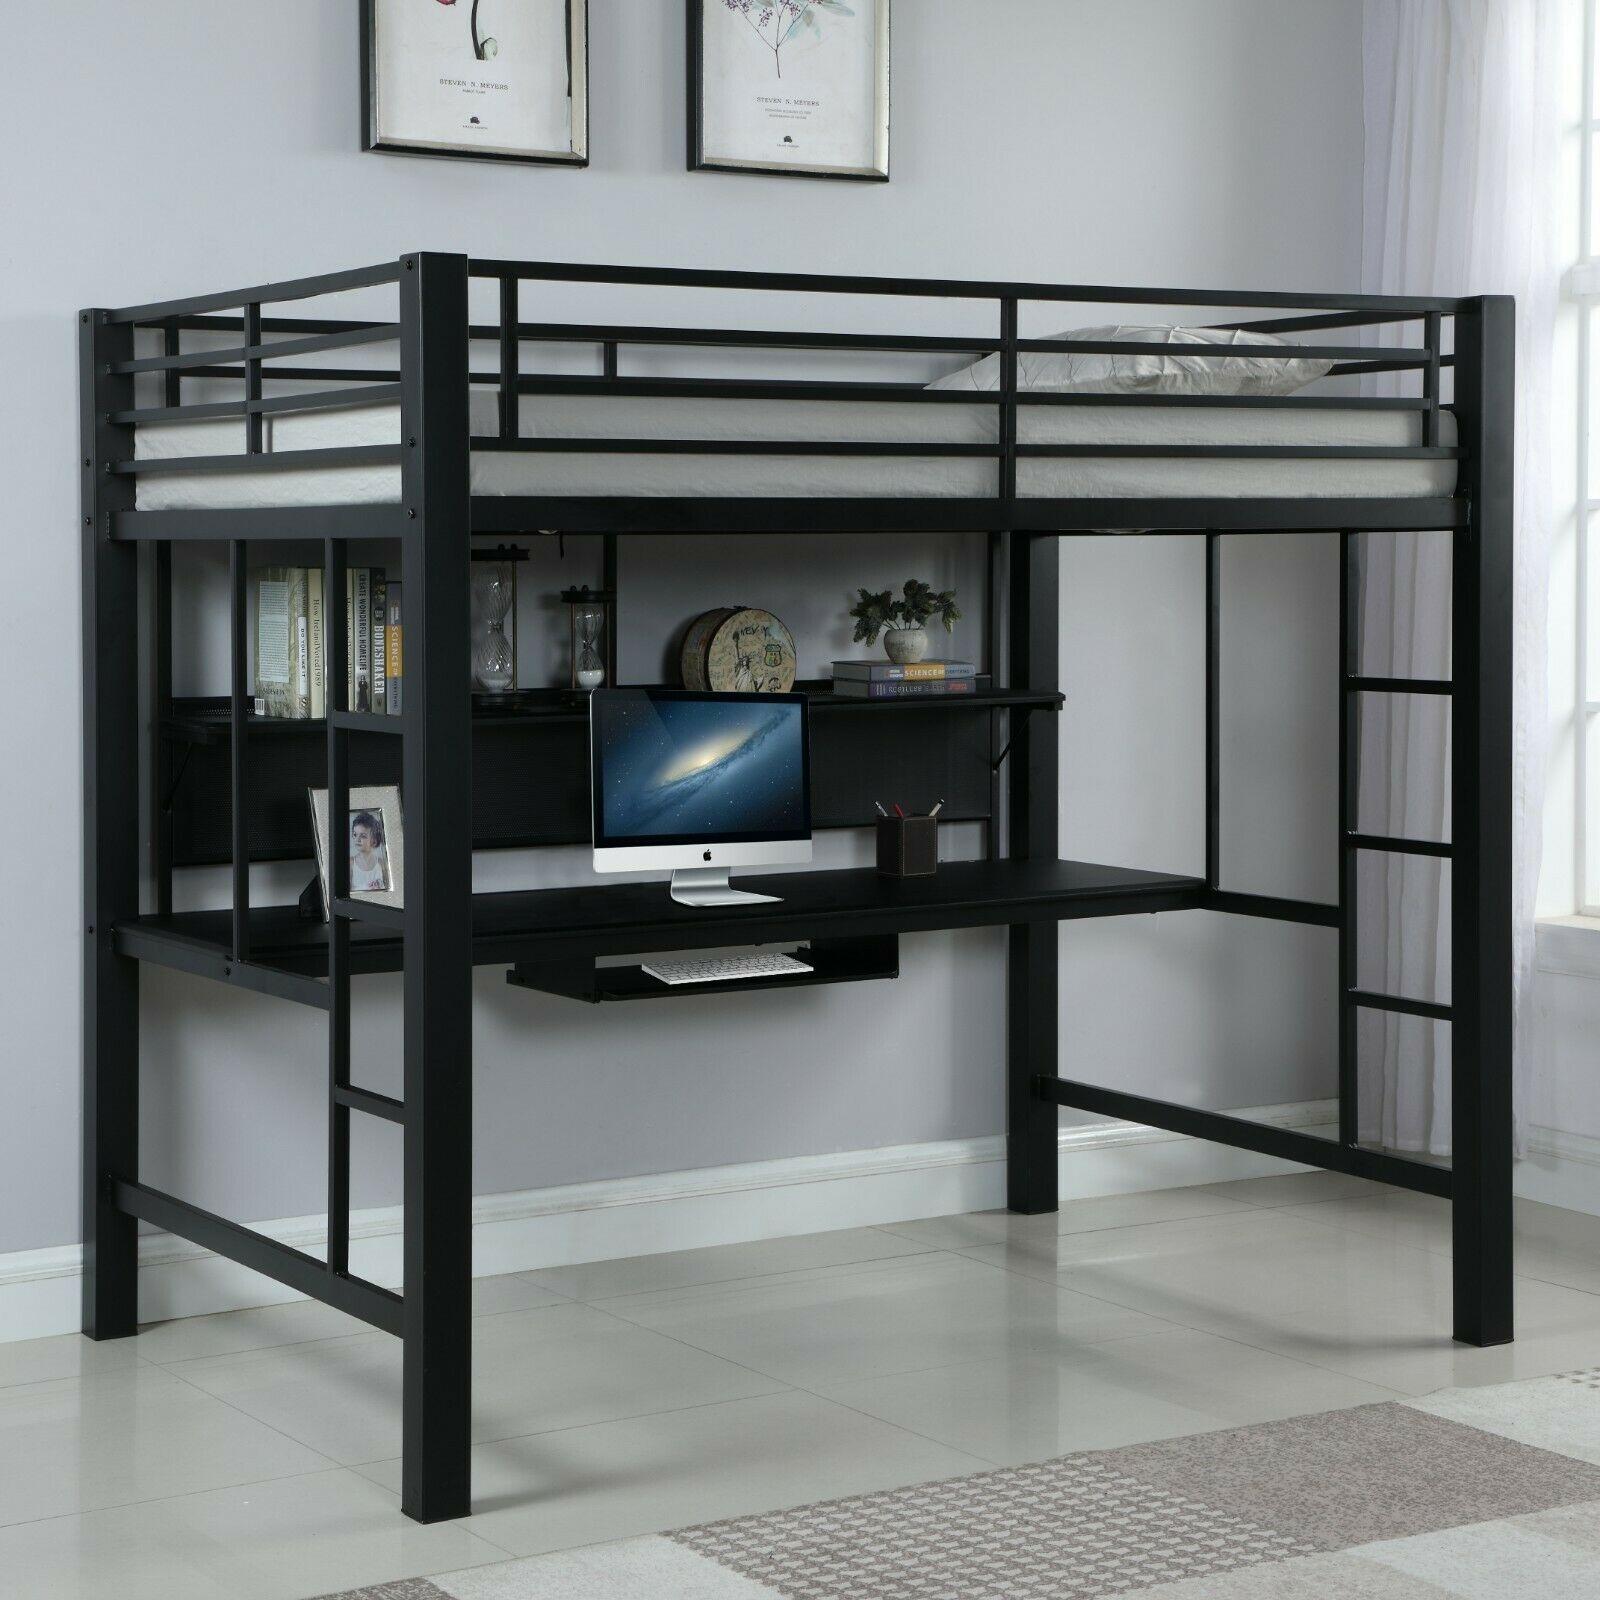 8 Tips To Make Loft Beds And Bunk, Bunk Bed Or Loft Bed